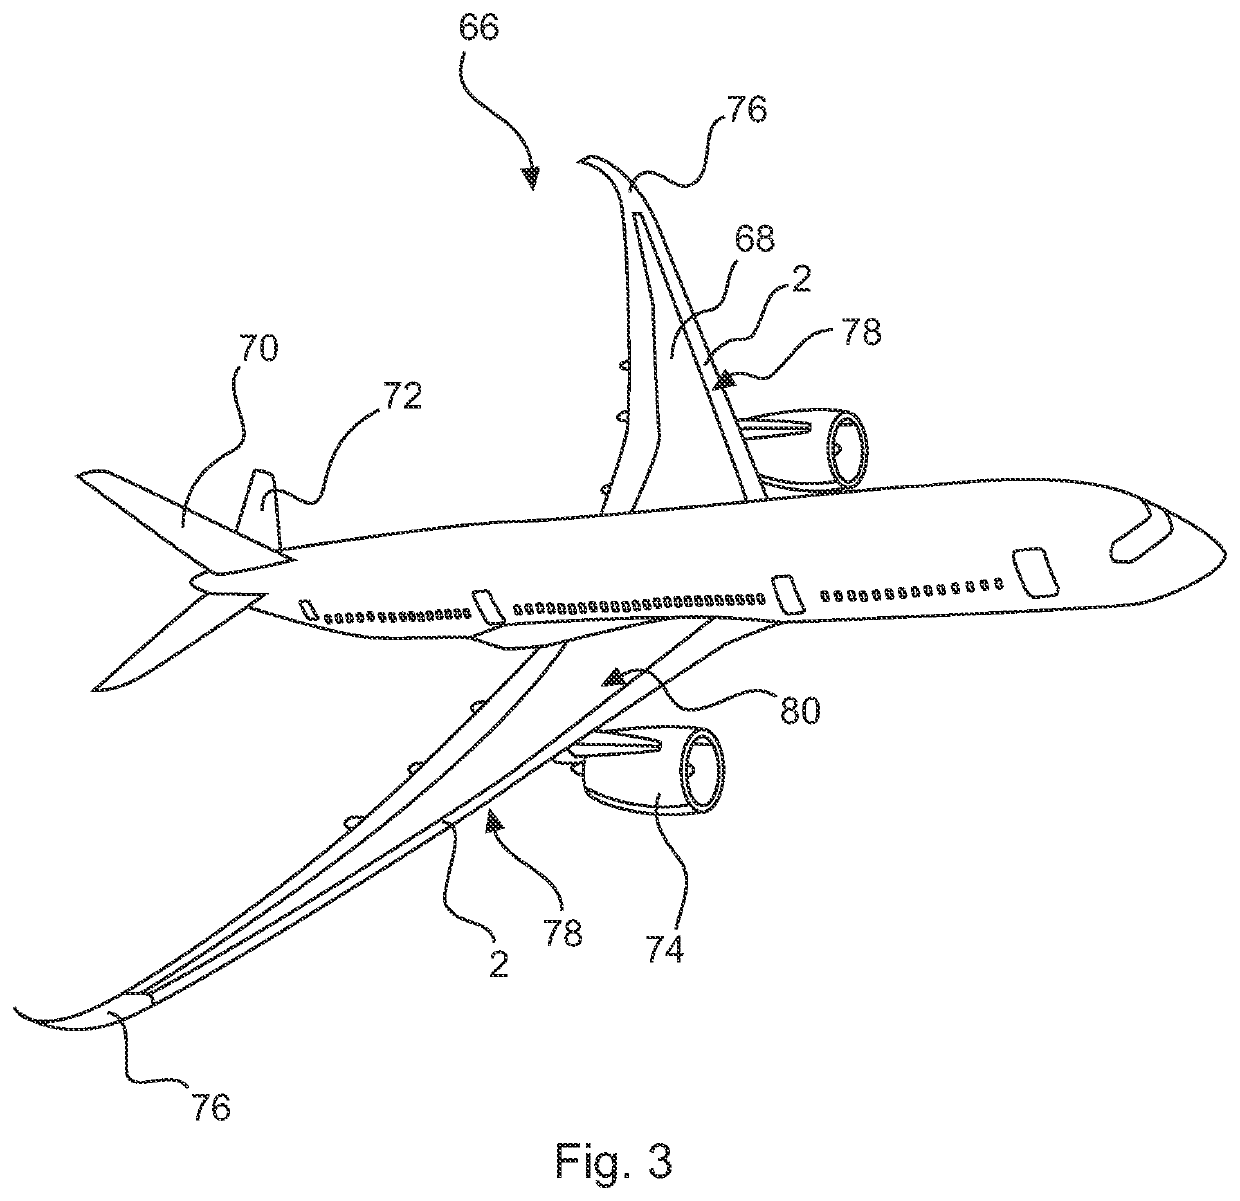 Flow body for an aircraft having a solid trailing-edge component